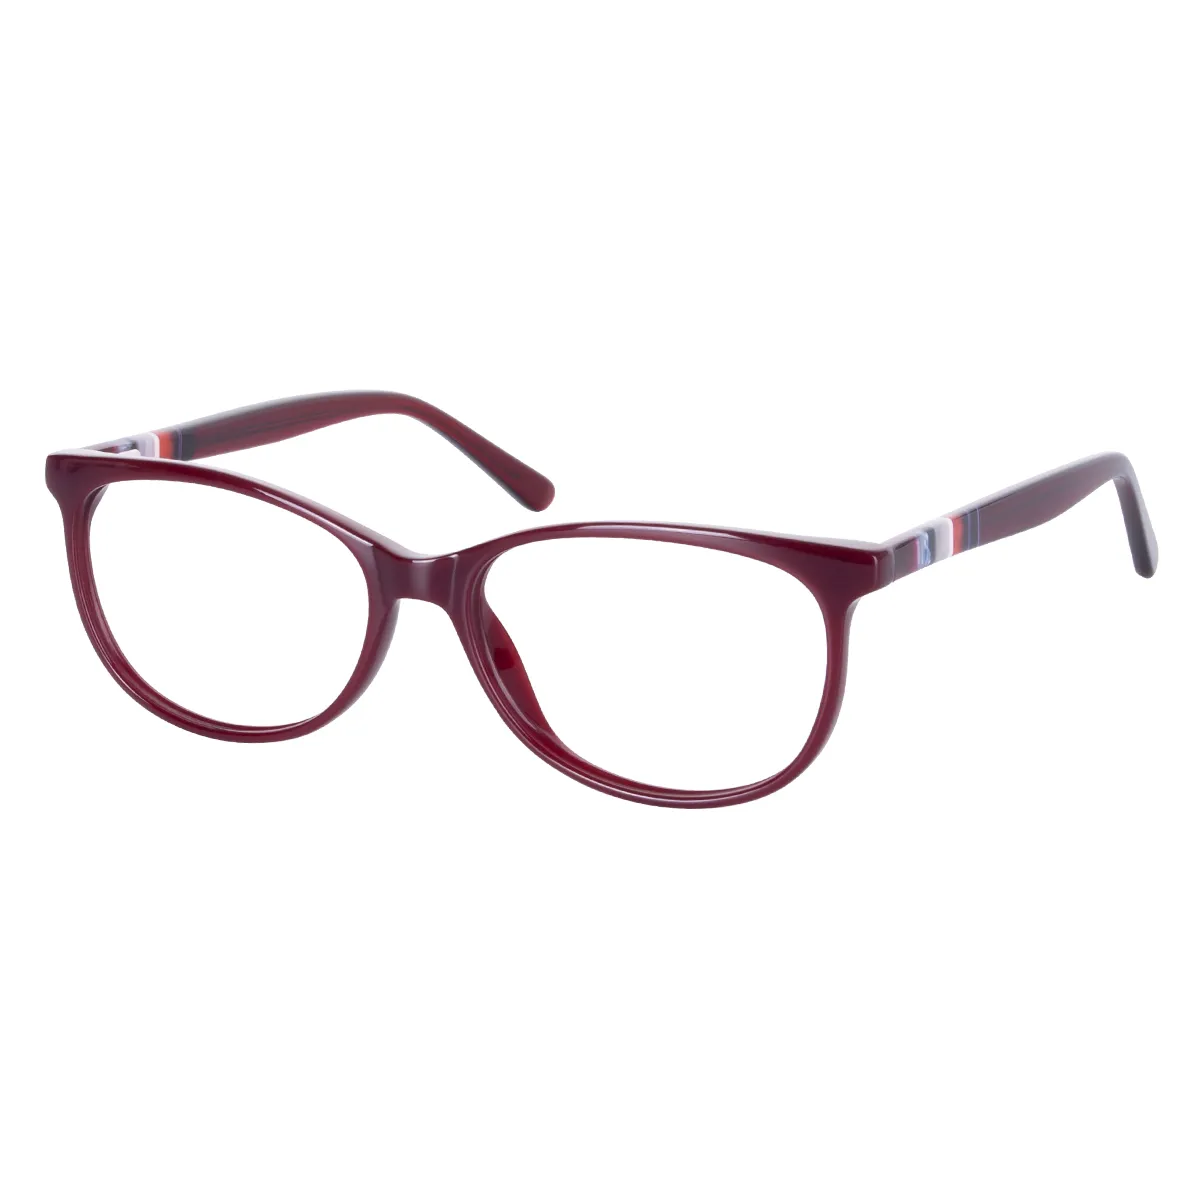 Blanca - Oval Brown Glasses for Women